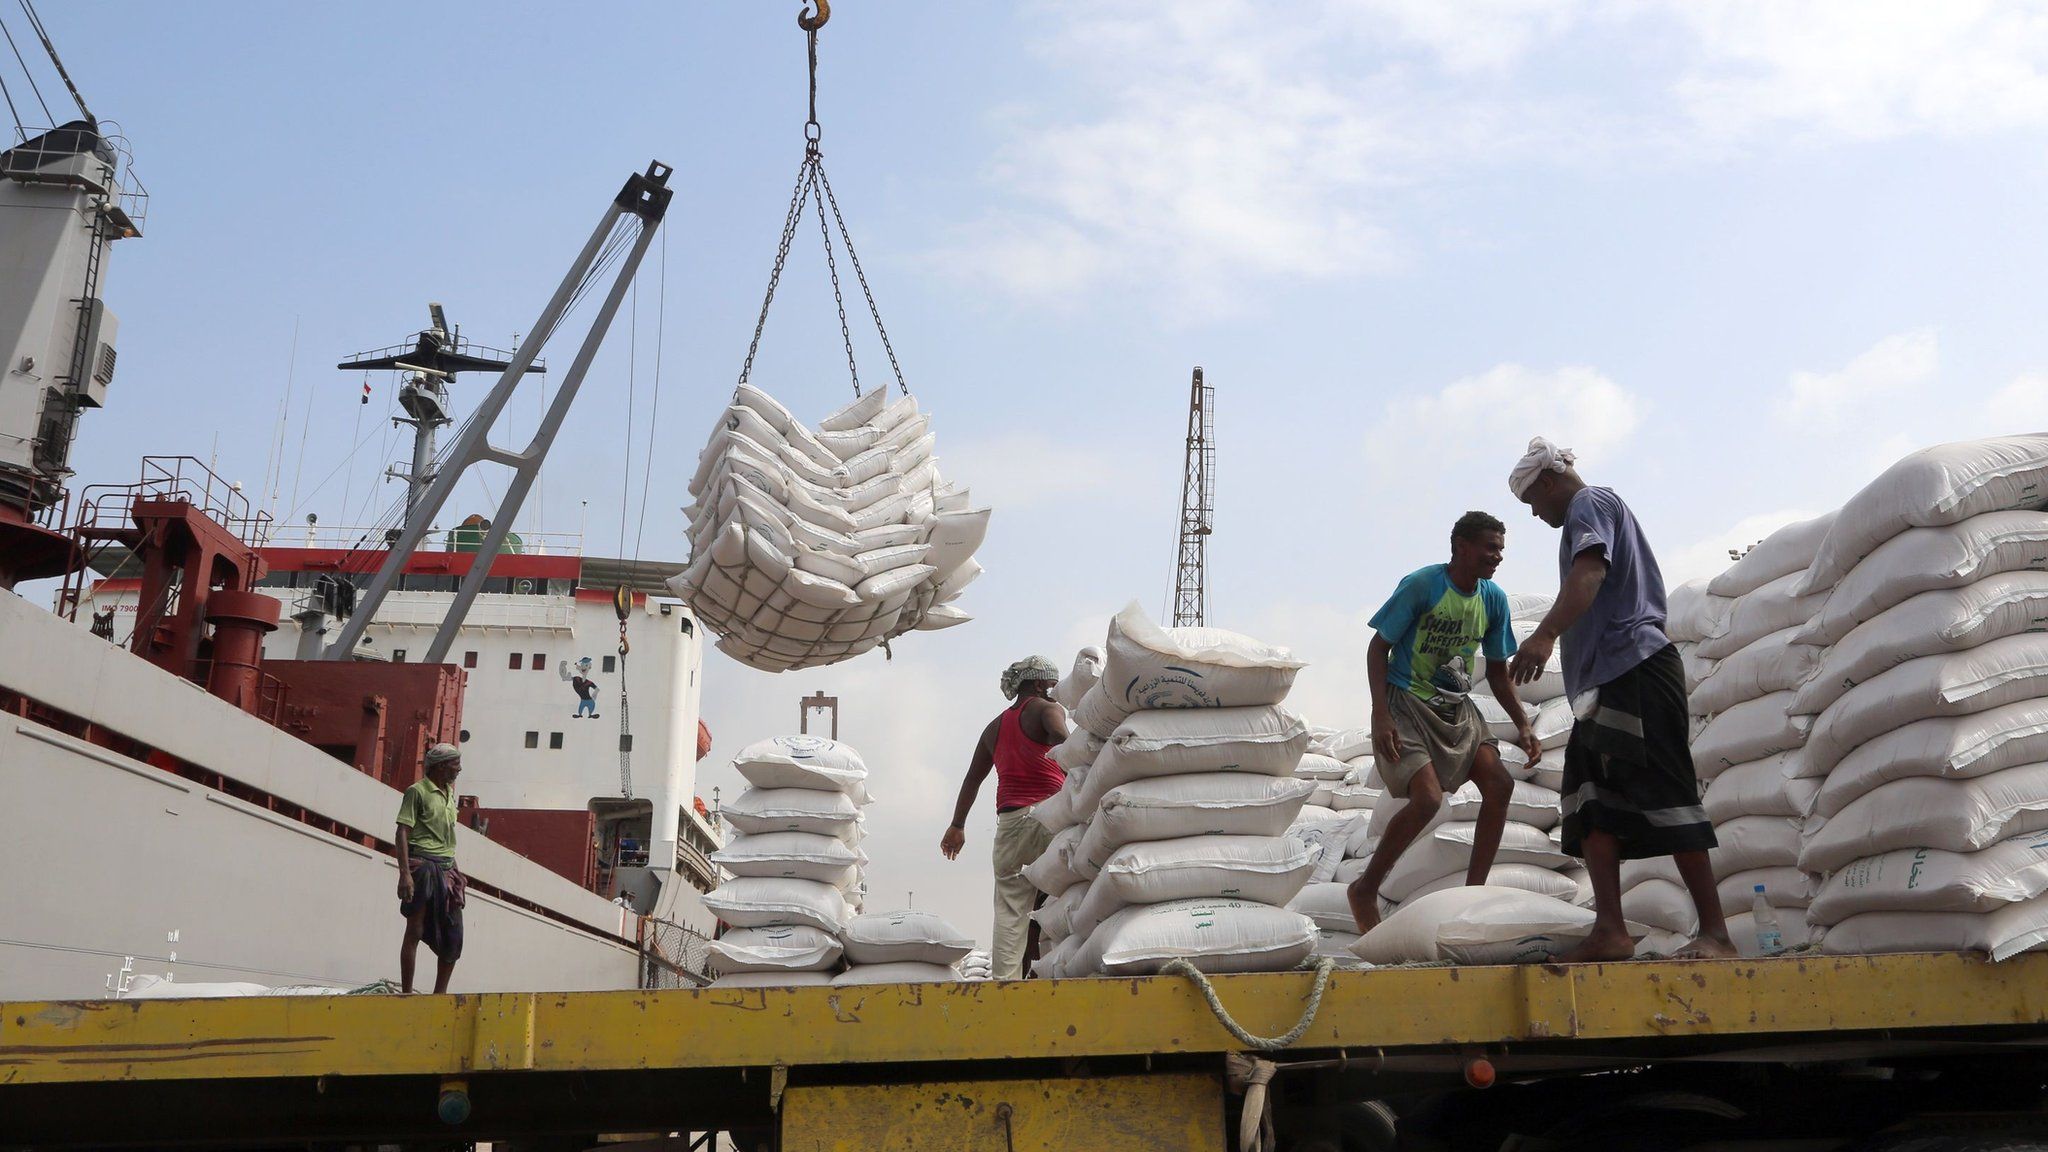 File photo showing workers unload food aid provided by Unicef from a cargo ship at the Red Sea port of Hudaydah (27 January 2018)